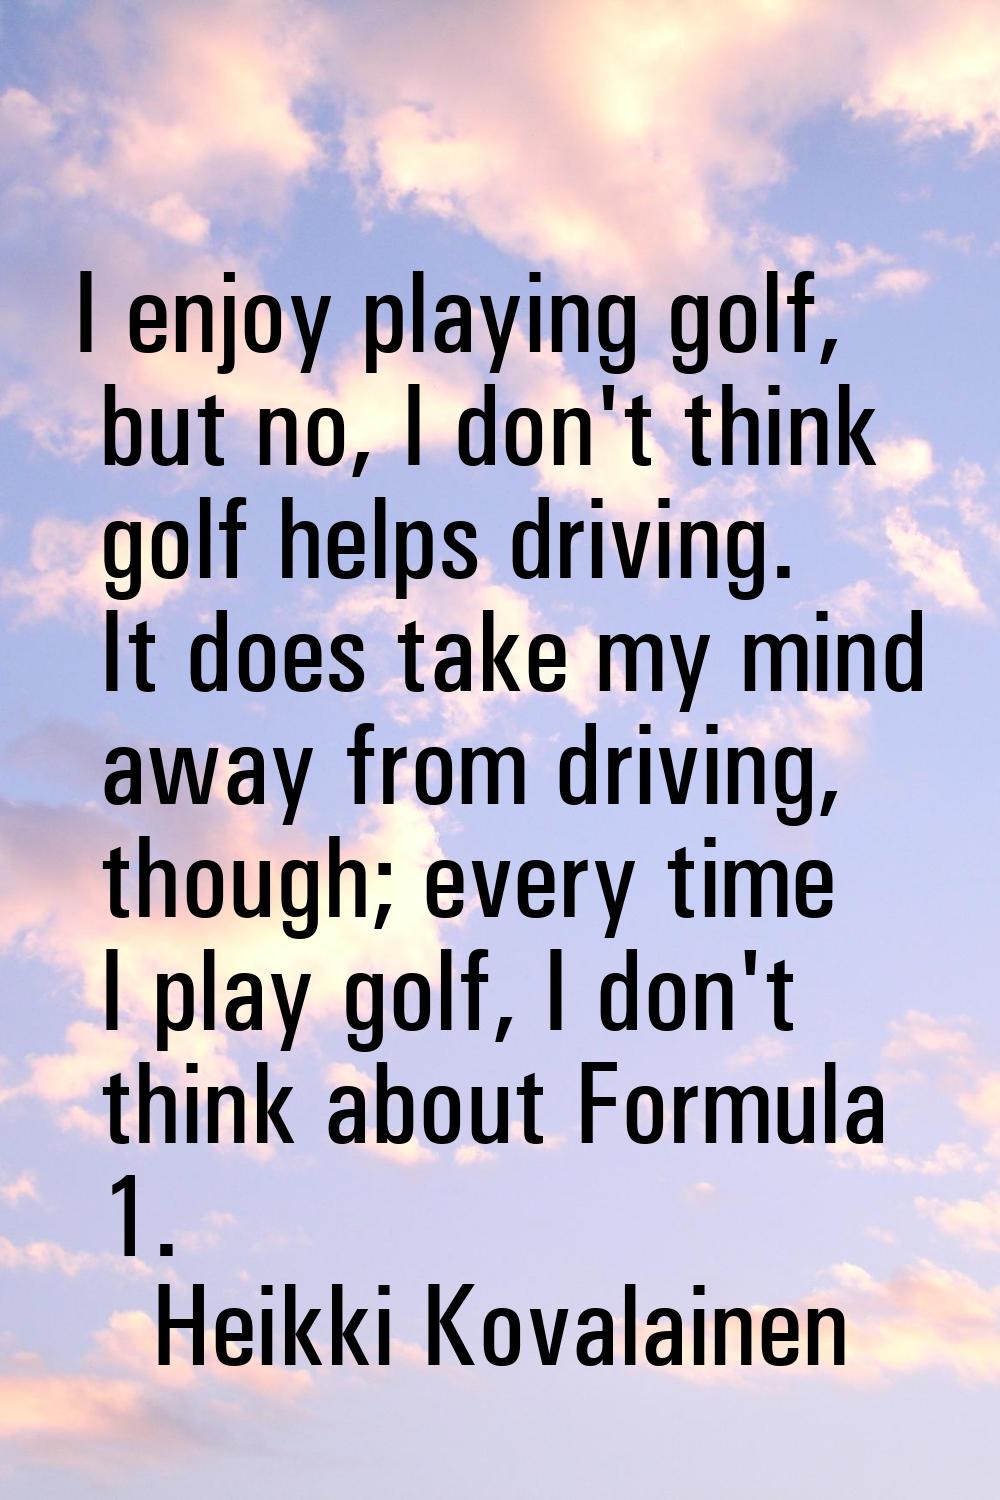 I enjoy playing golf, but no, I don't think golf helps driving. It does take my mind away from driv